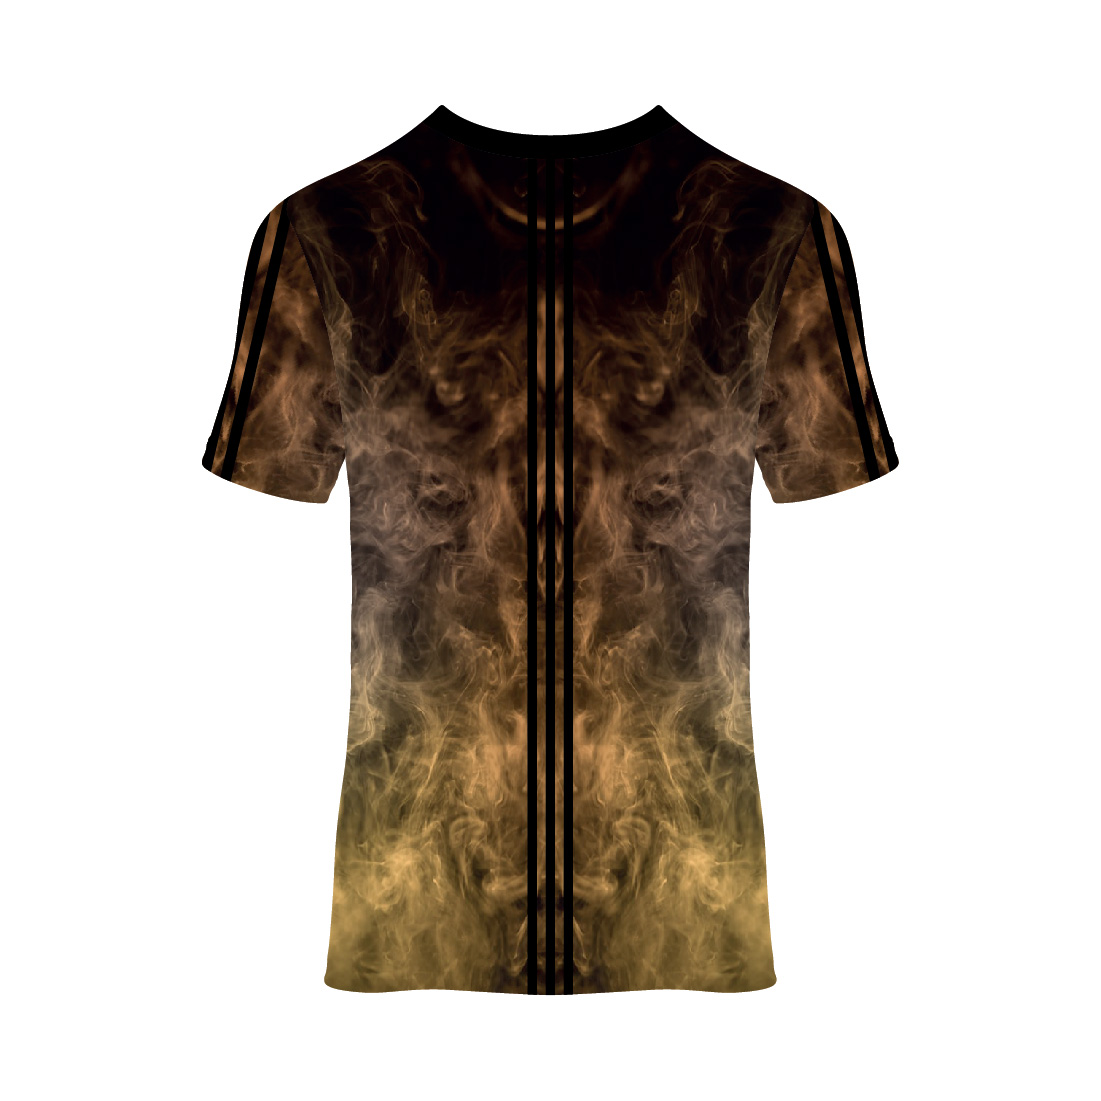 Flame print and brown color.